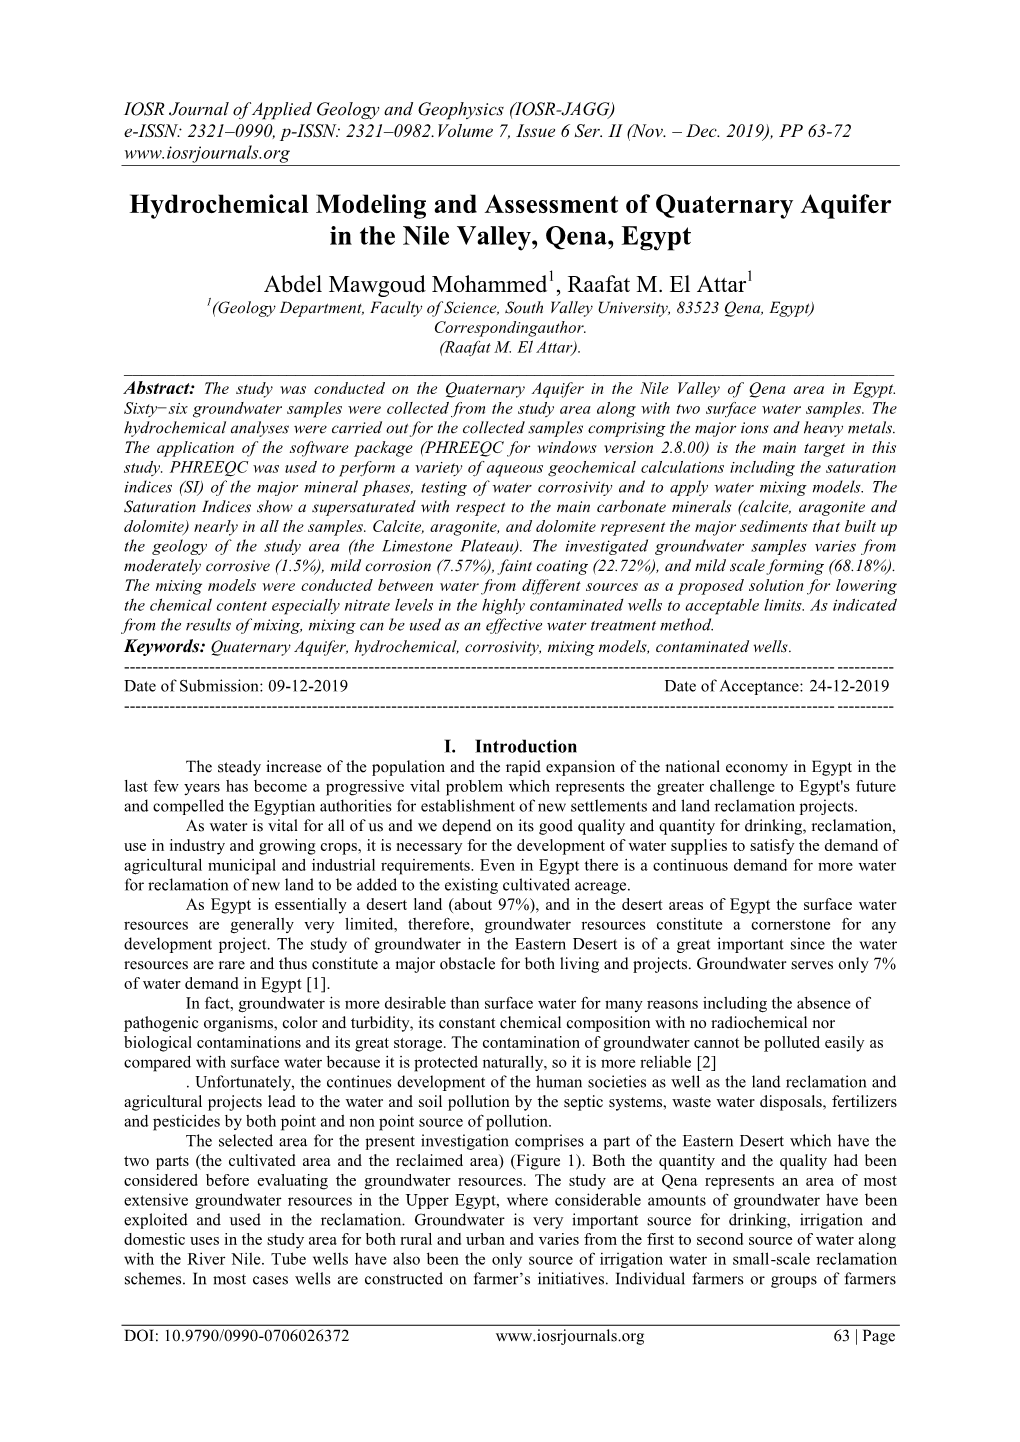 Hydrochemical Modeling and Assessment of Quaternary Aquifer in the Nile Valley, Qena, Egypt